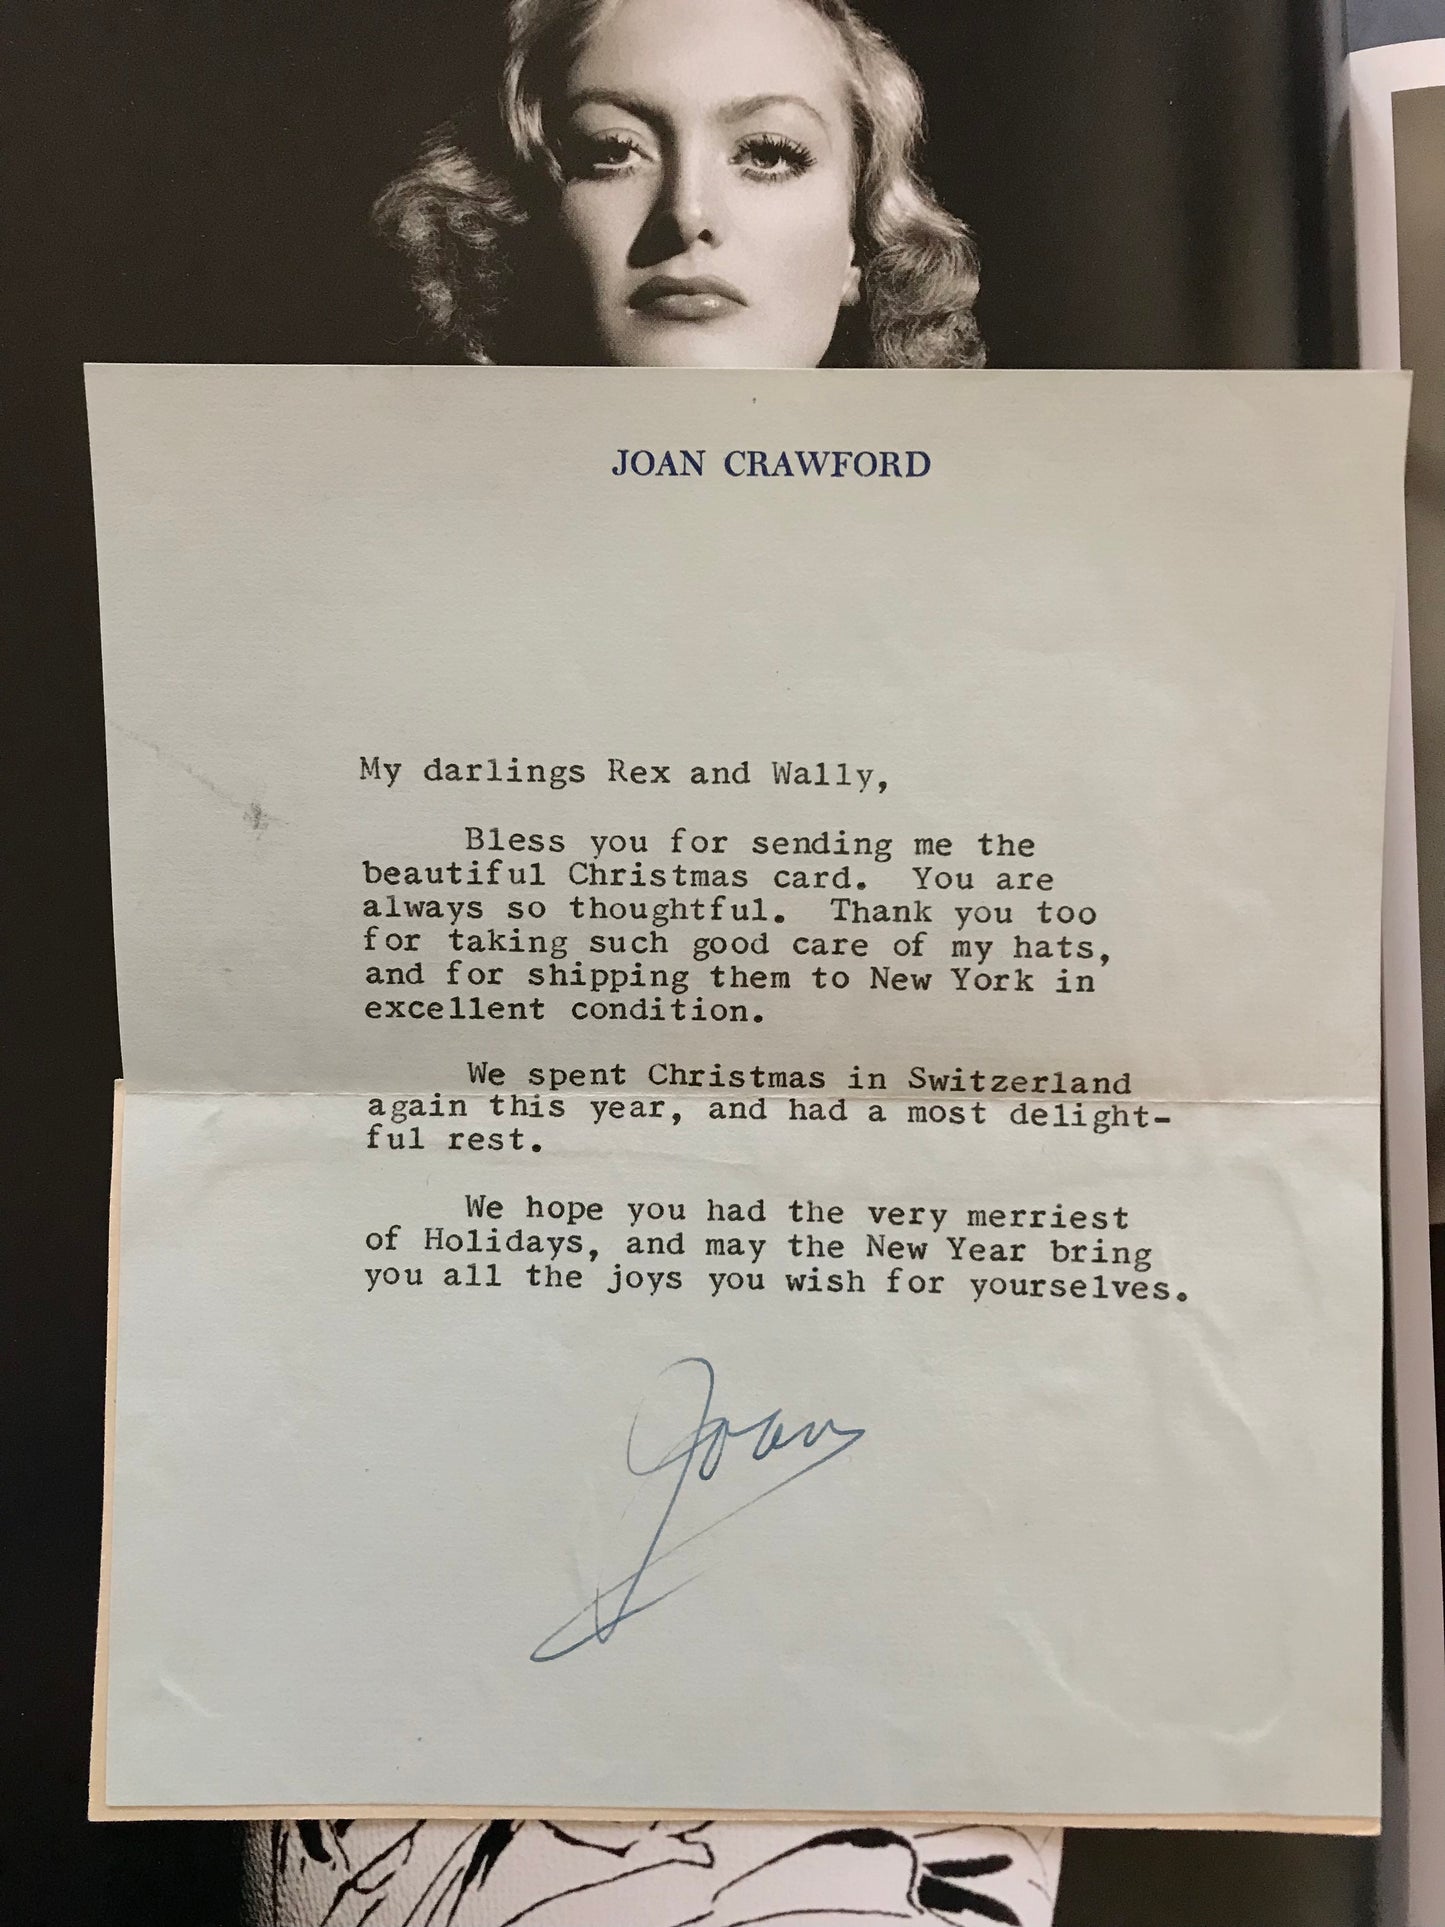 Letter signed by Joan Crawford, circa 1970